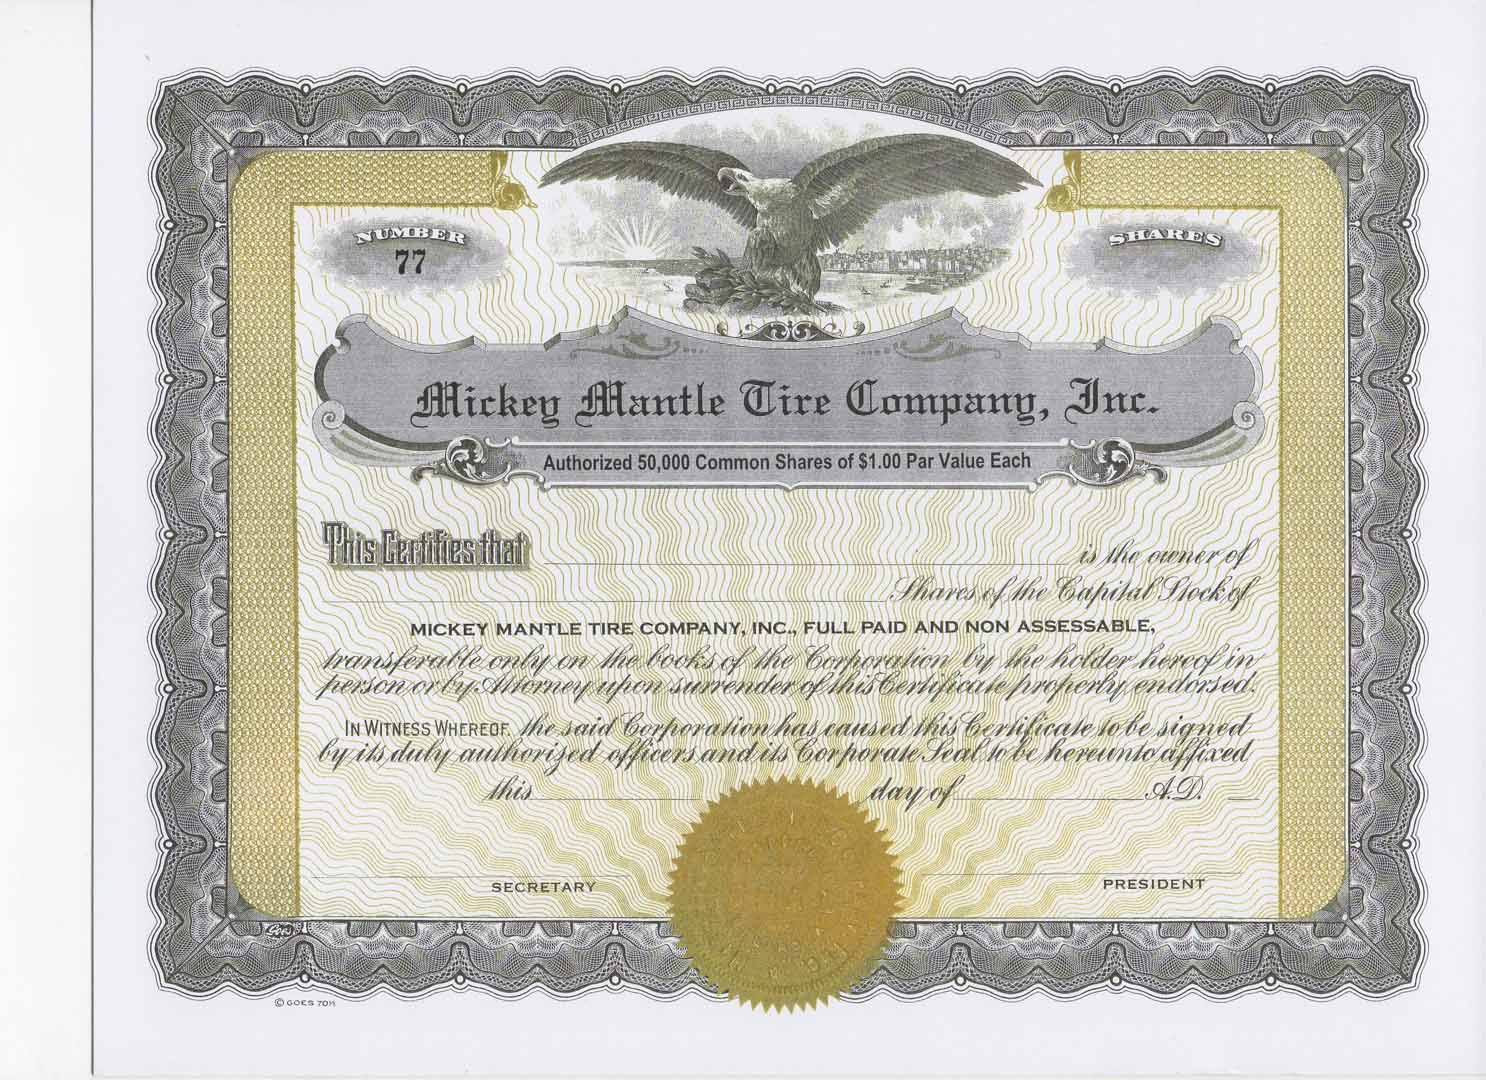 1960-1969 mantle tire stock certificate, possible fake